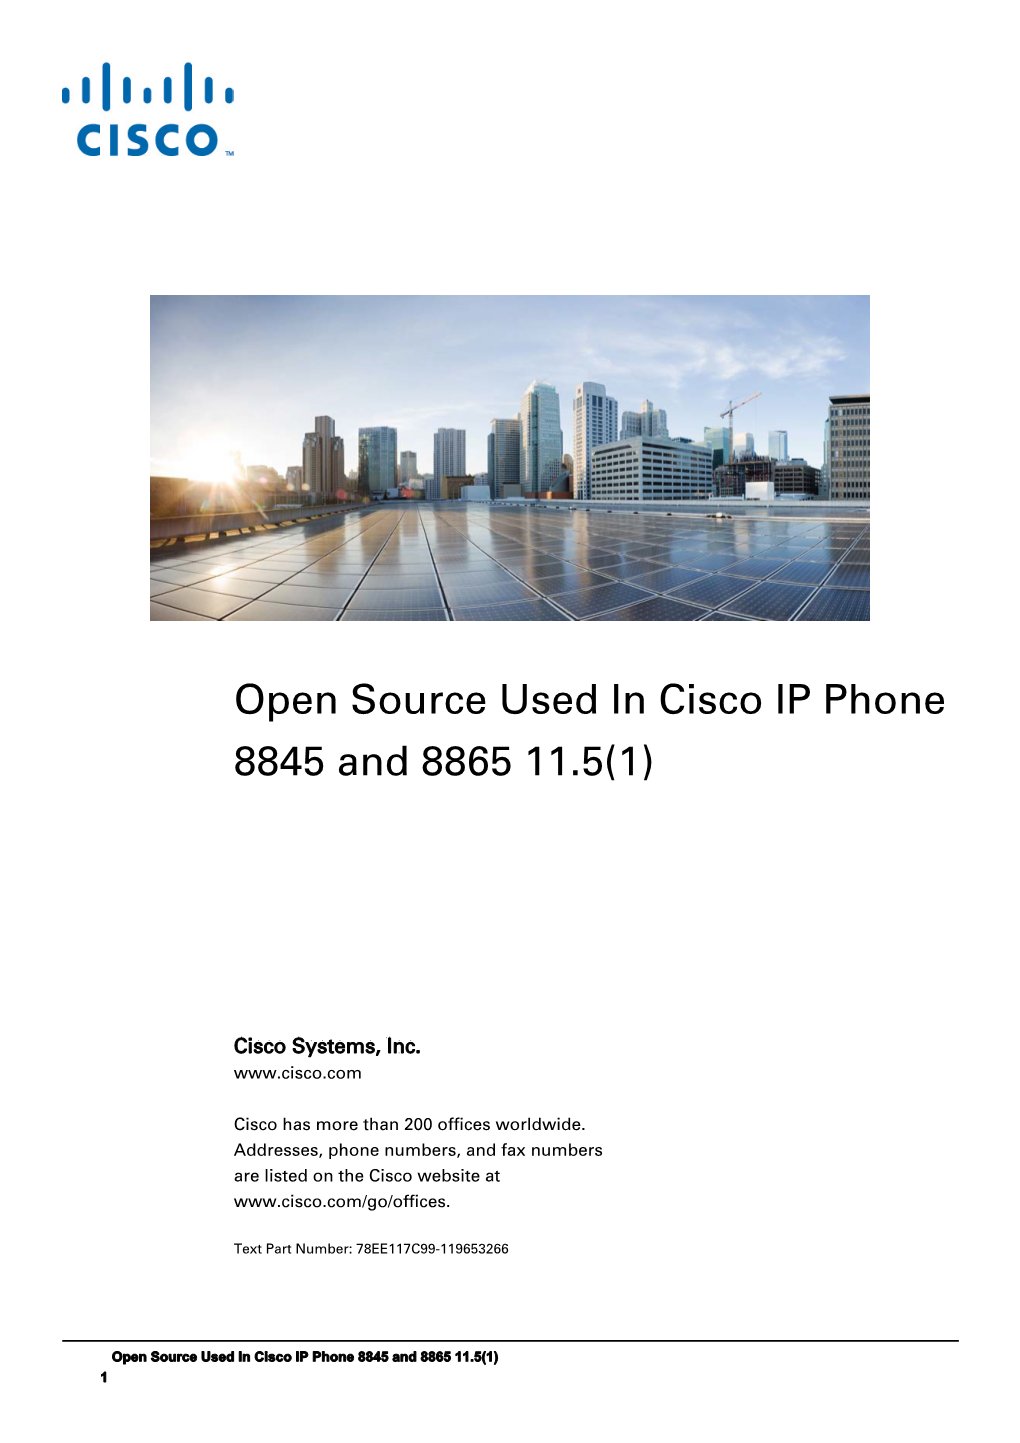 Cisco IP Phone 8845 and 8865 Series Open Source License for Firmware Release 11.5(1)